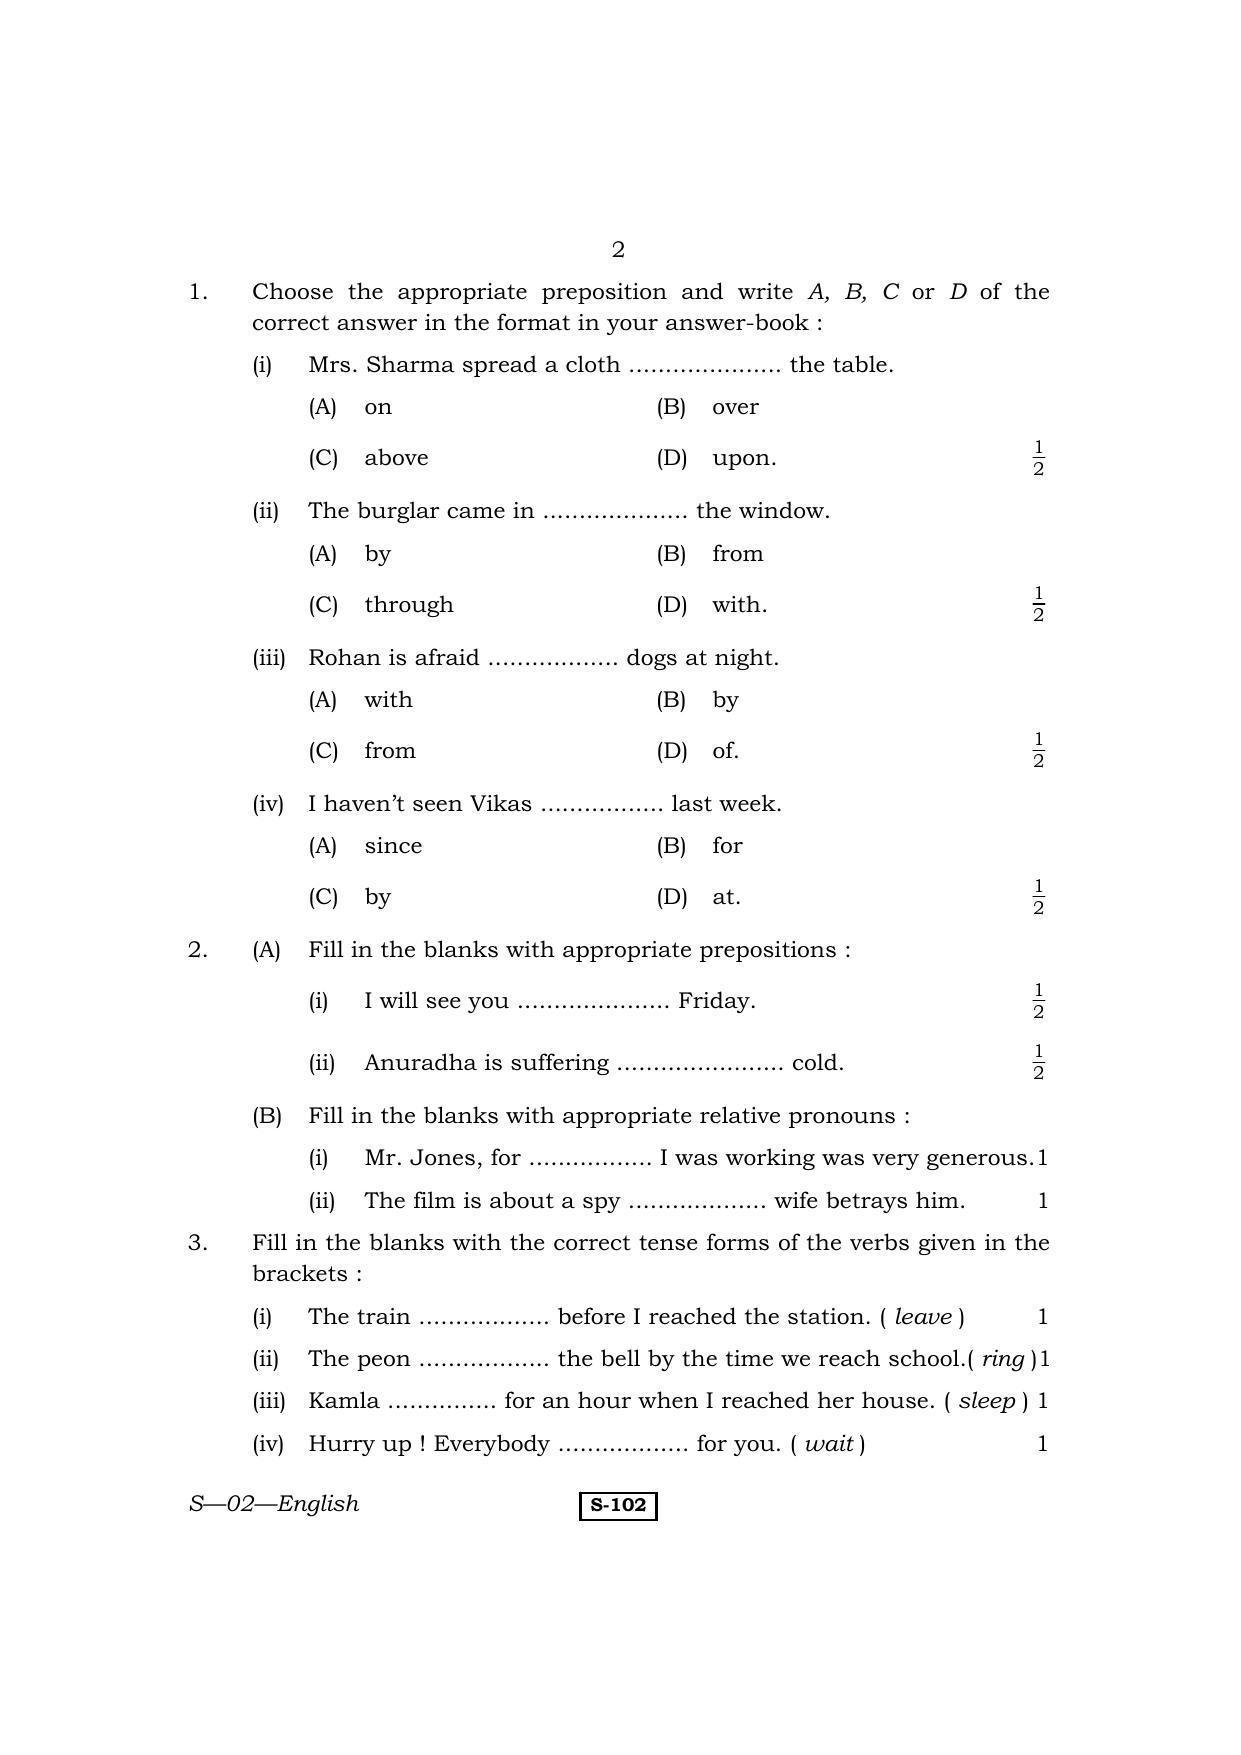 RBSE Class 10 English 2011 Question Paper - Page 2